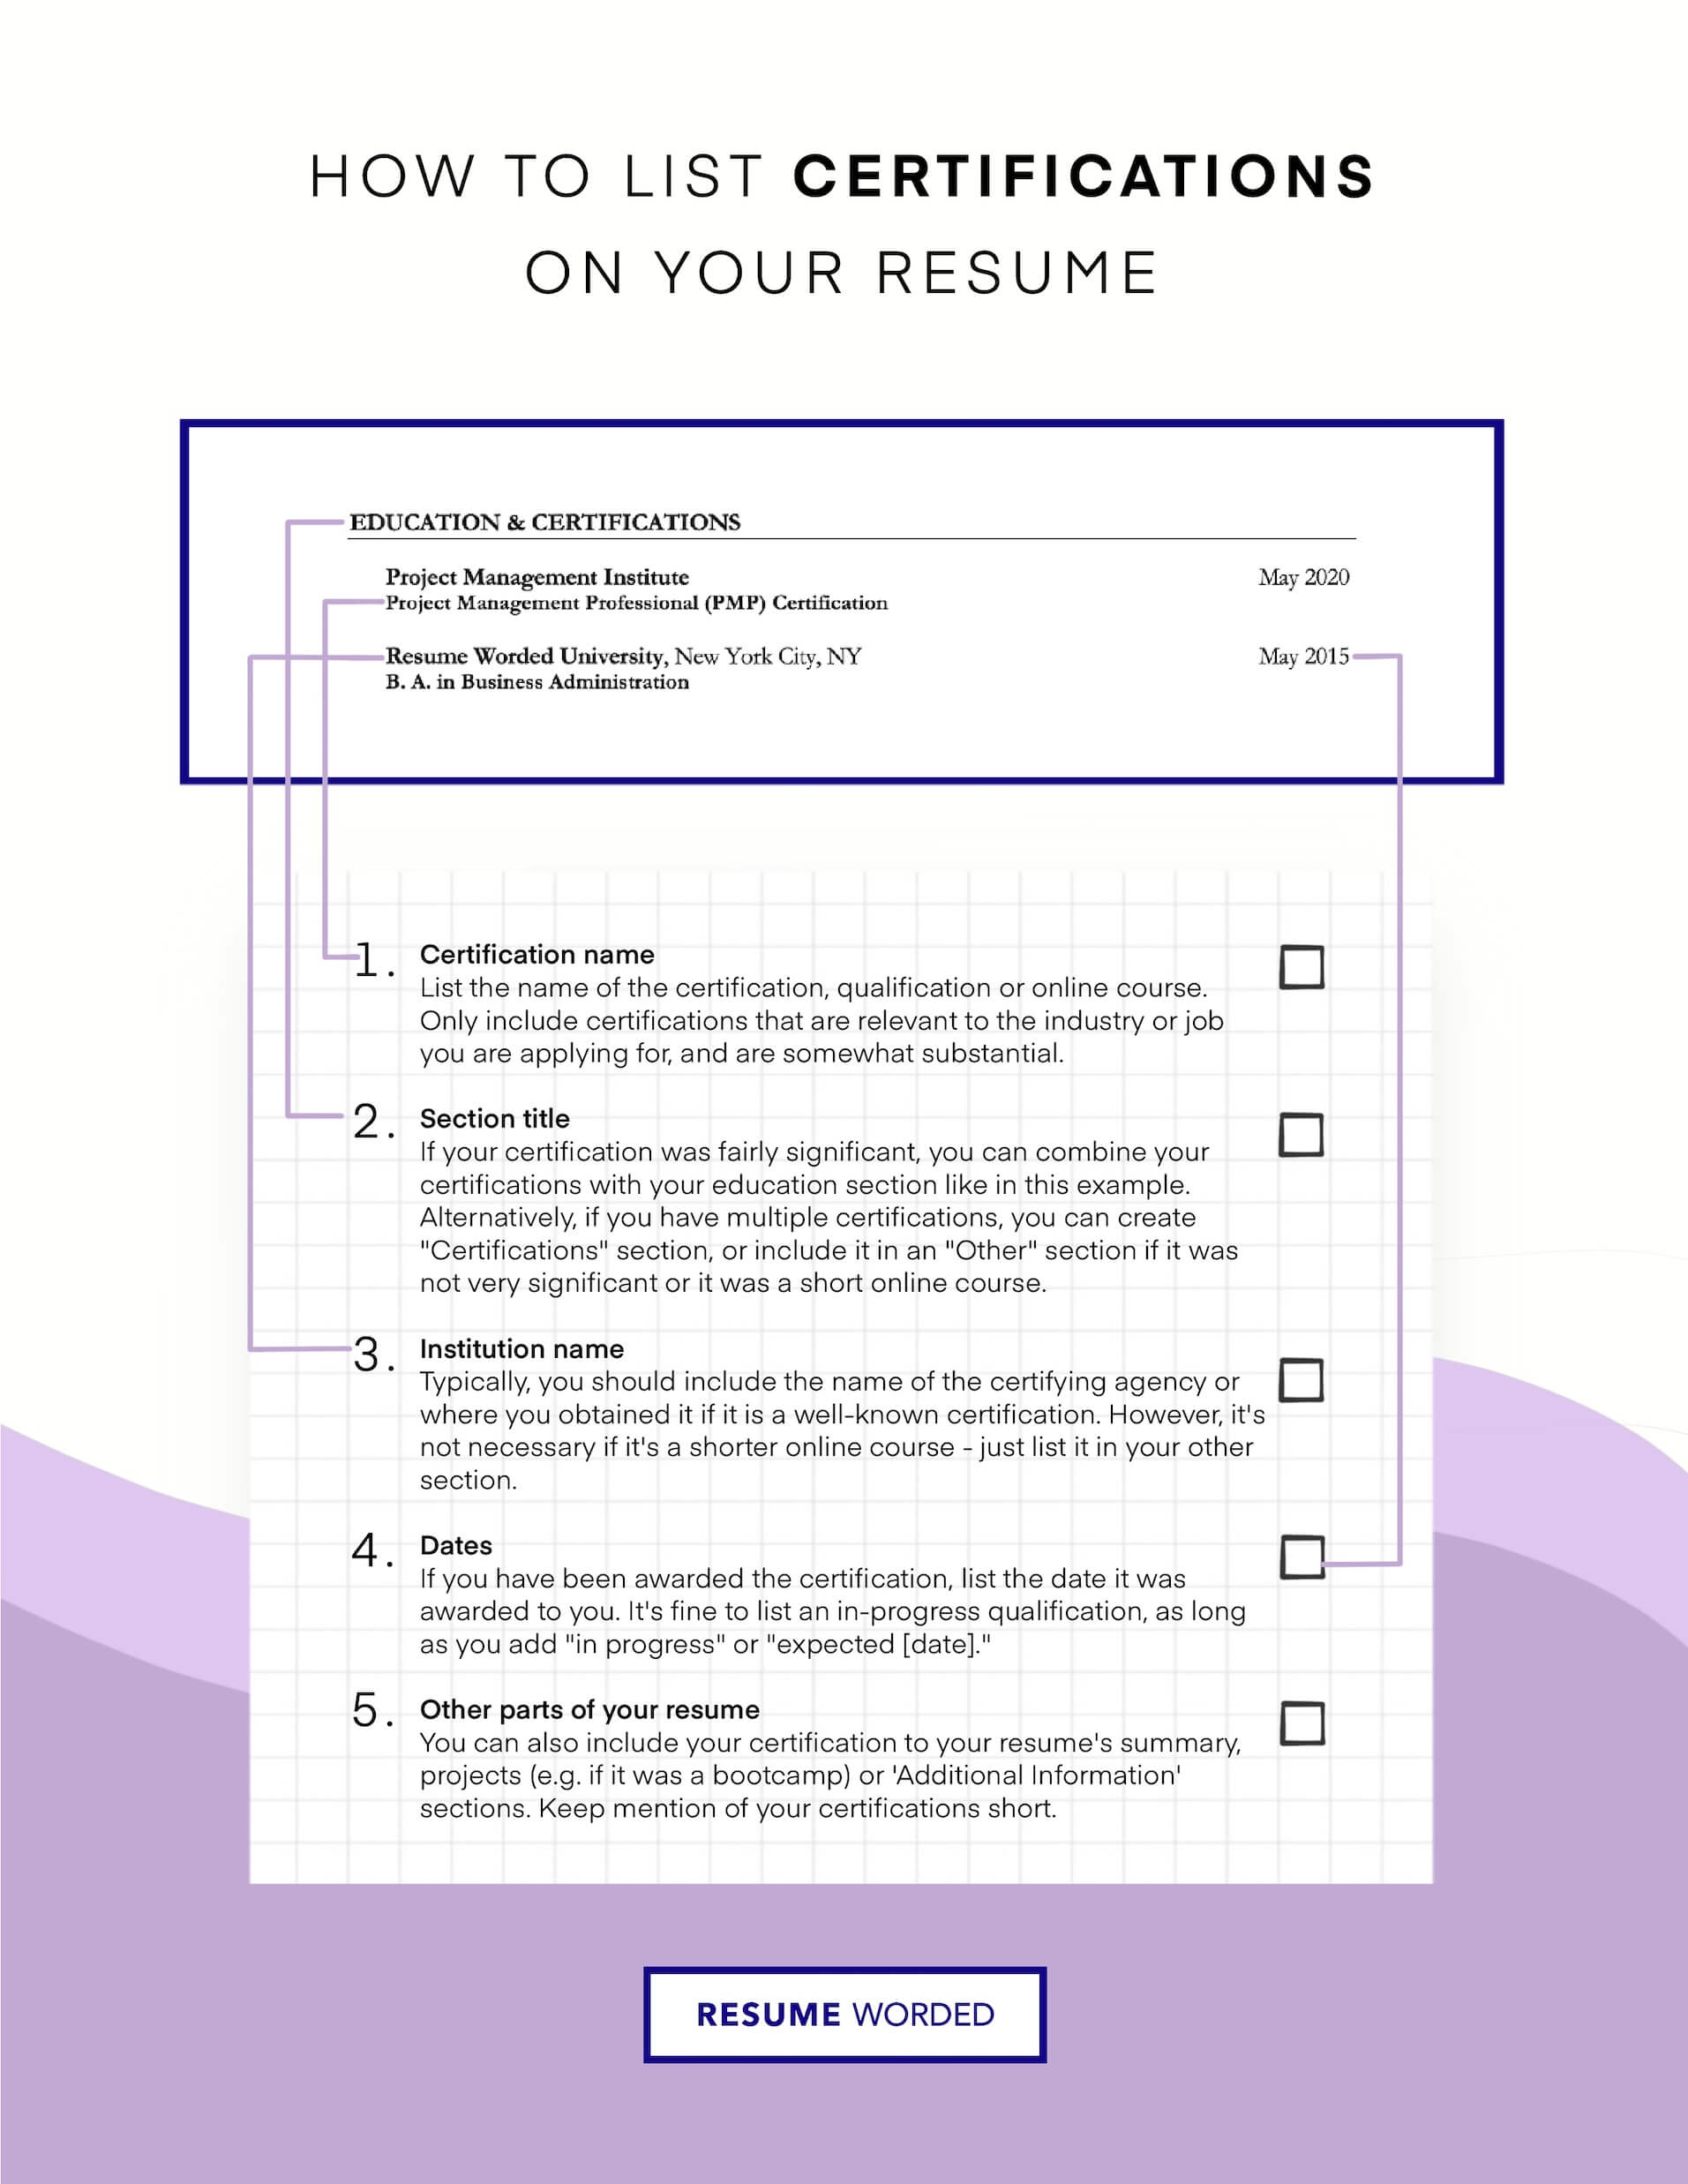 Get property-specific certification. - Property Accountant Resume